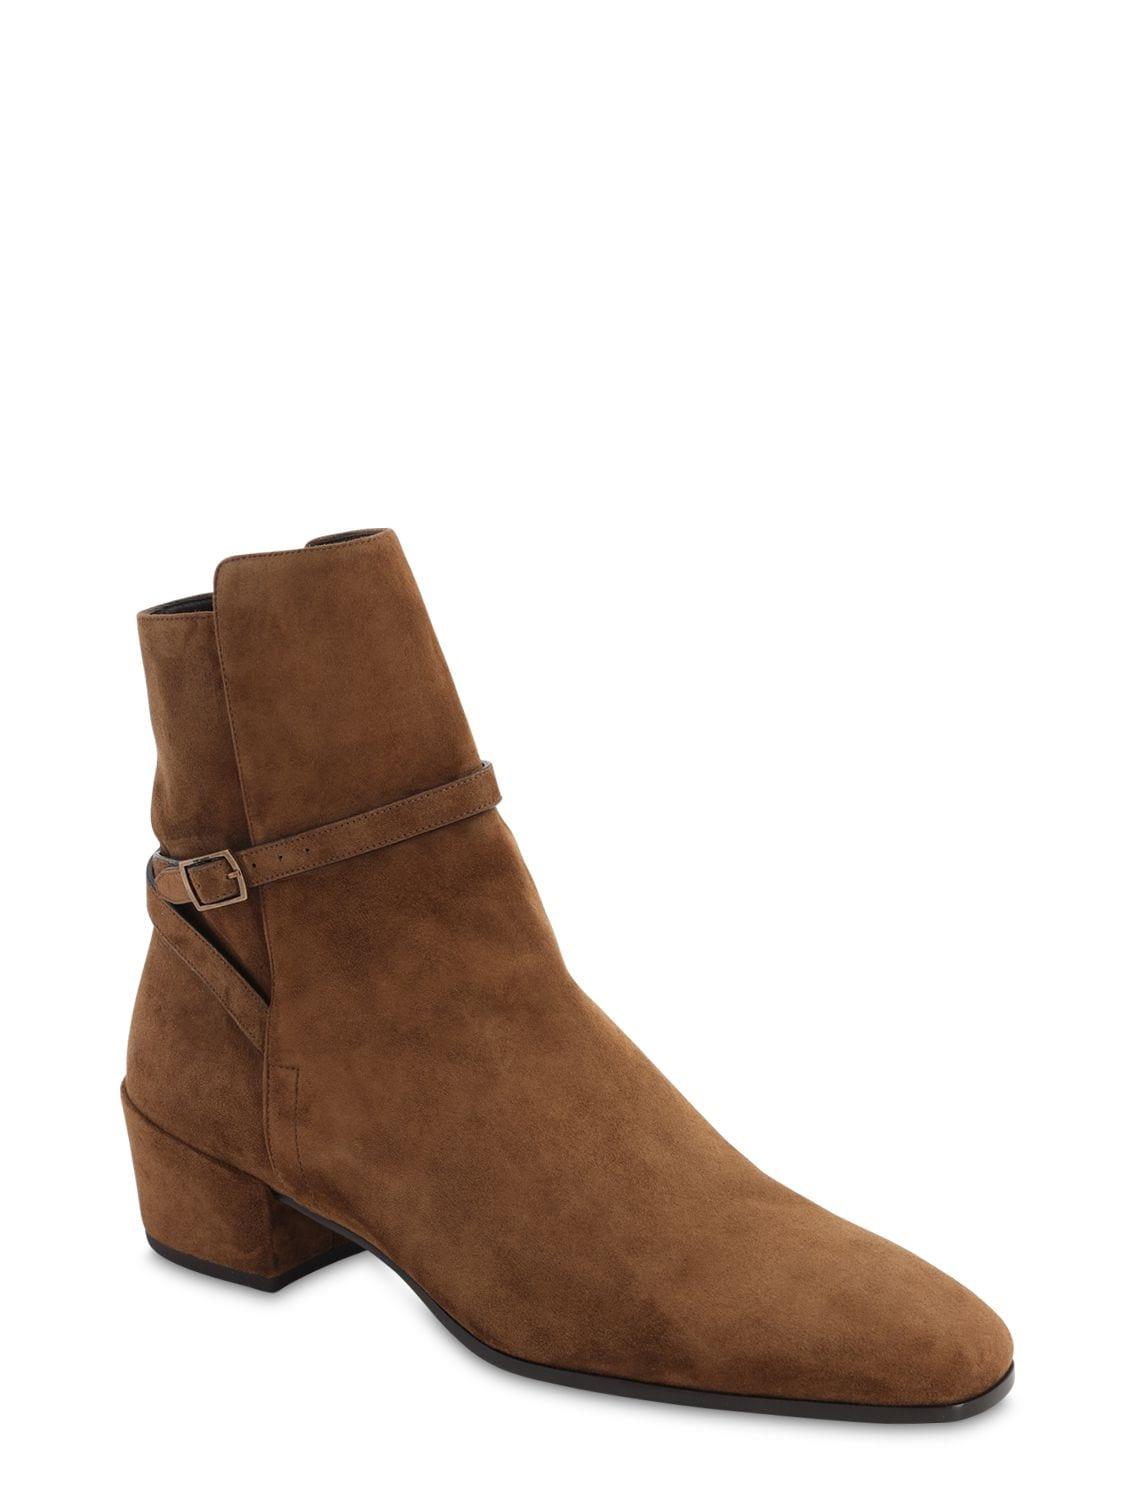 Saint Laurent Clementi Suede Boots in Toffee (Brown) for Men | Lyst